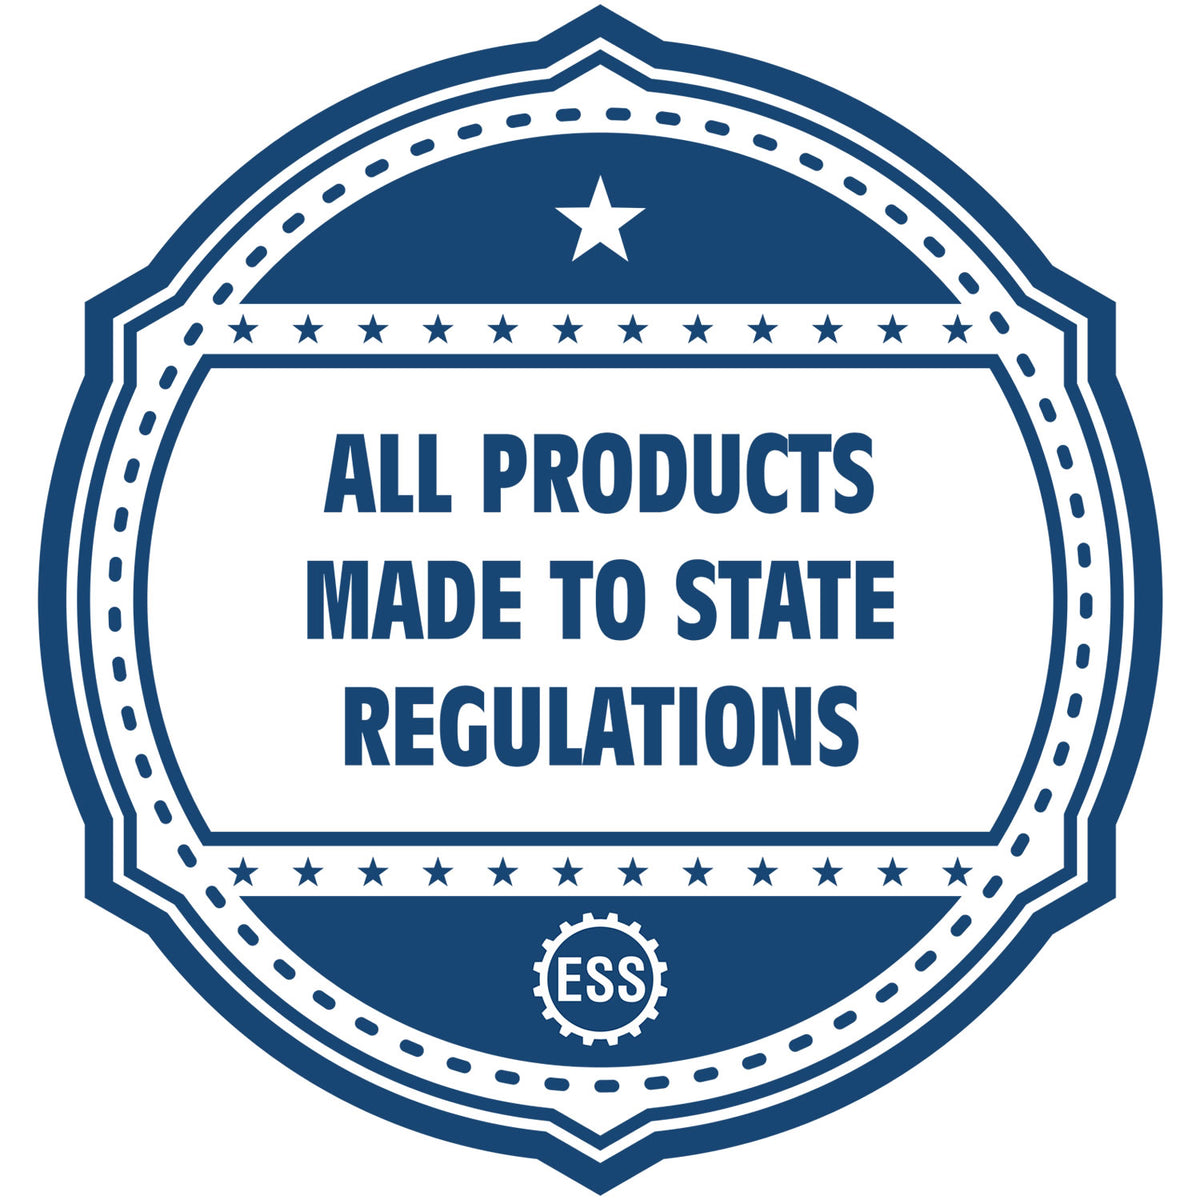 A blue icon or badge for the Hybrid New Jersey Landscape Architect Seal showing that this product is made in compliance with state regulations.